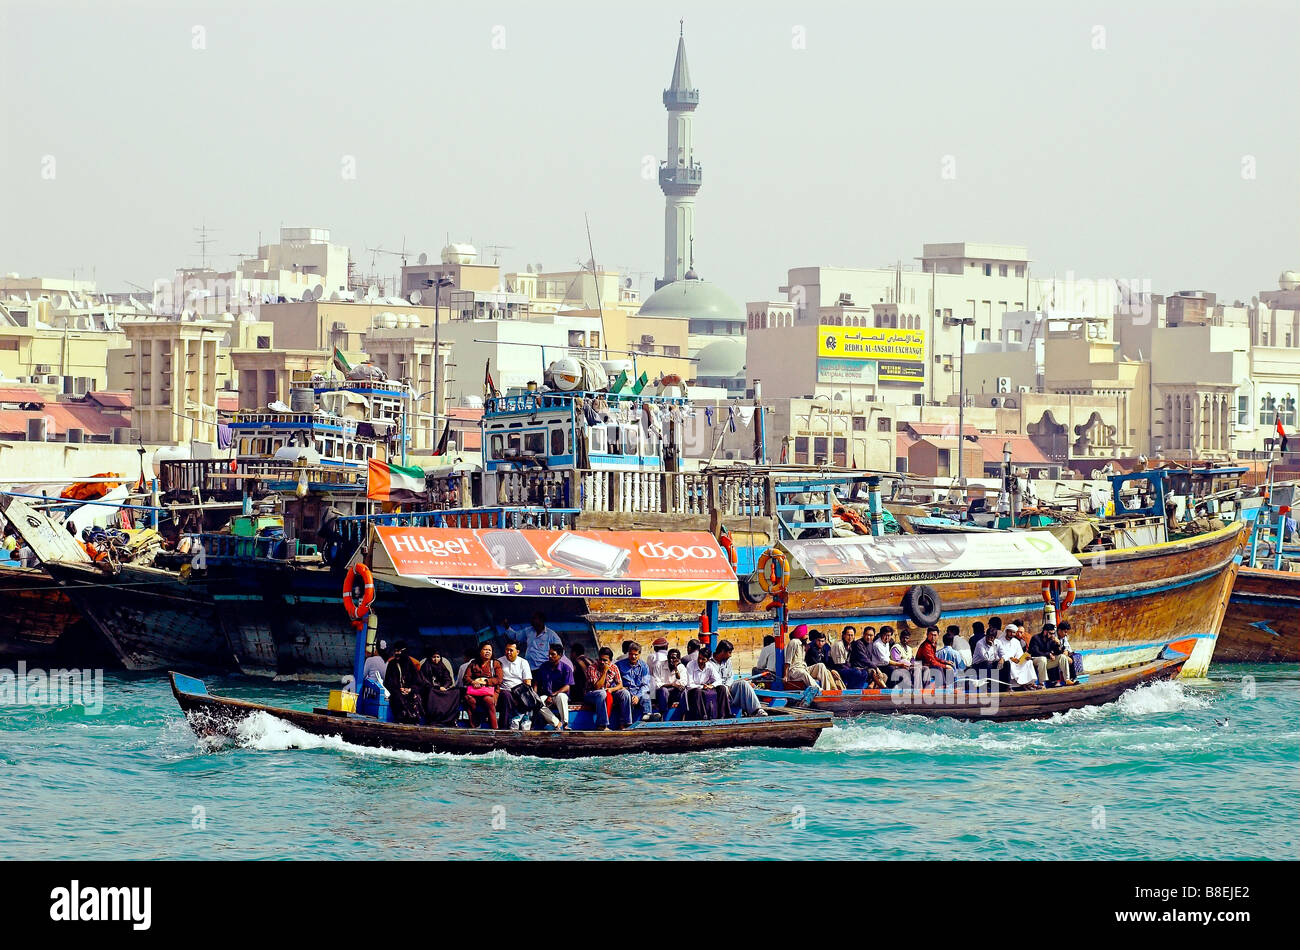 Water taxis taking workers across The Creek, Dubai with  traditional freight boats Dhows Stock Photo